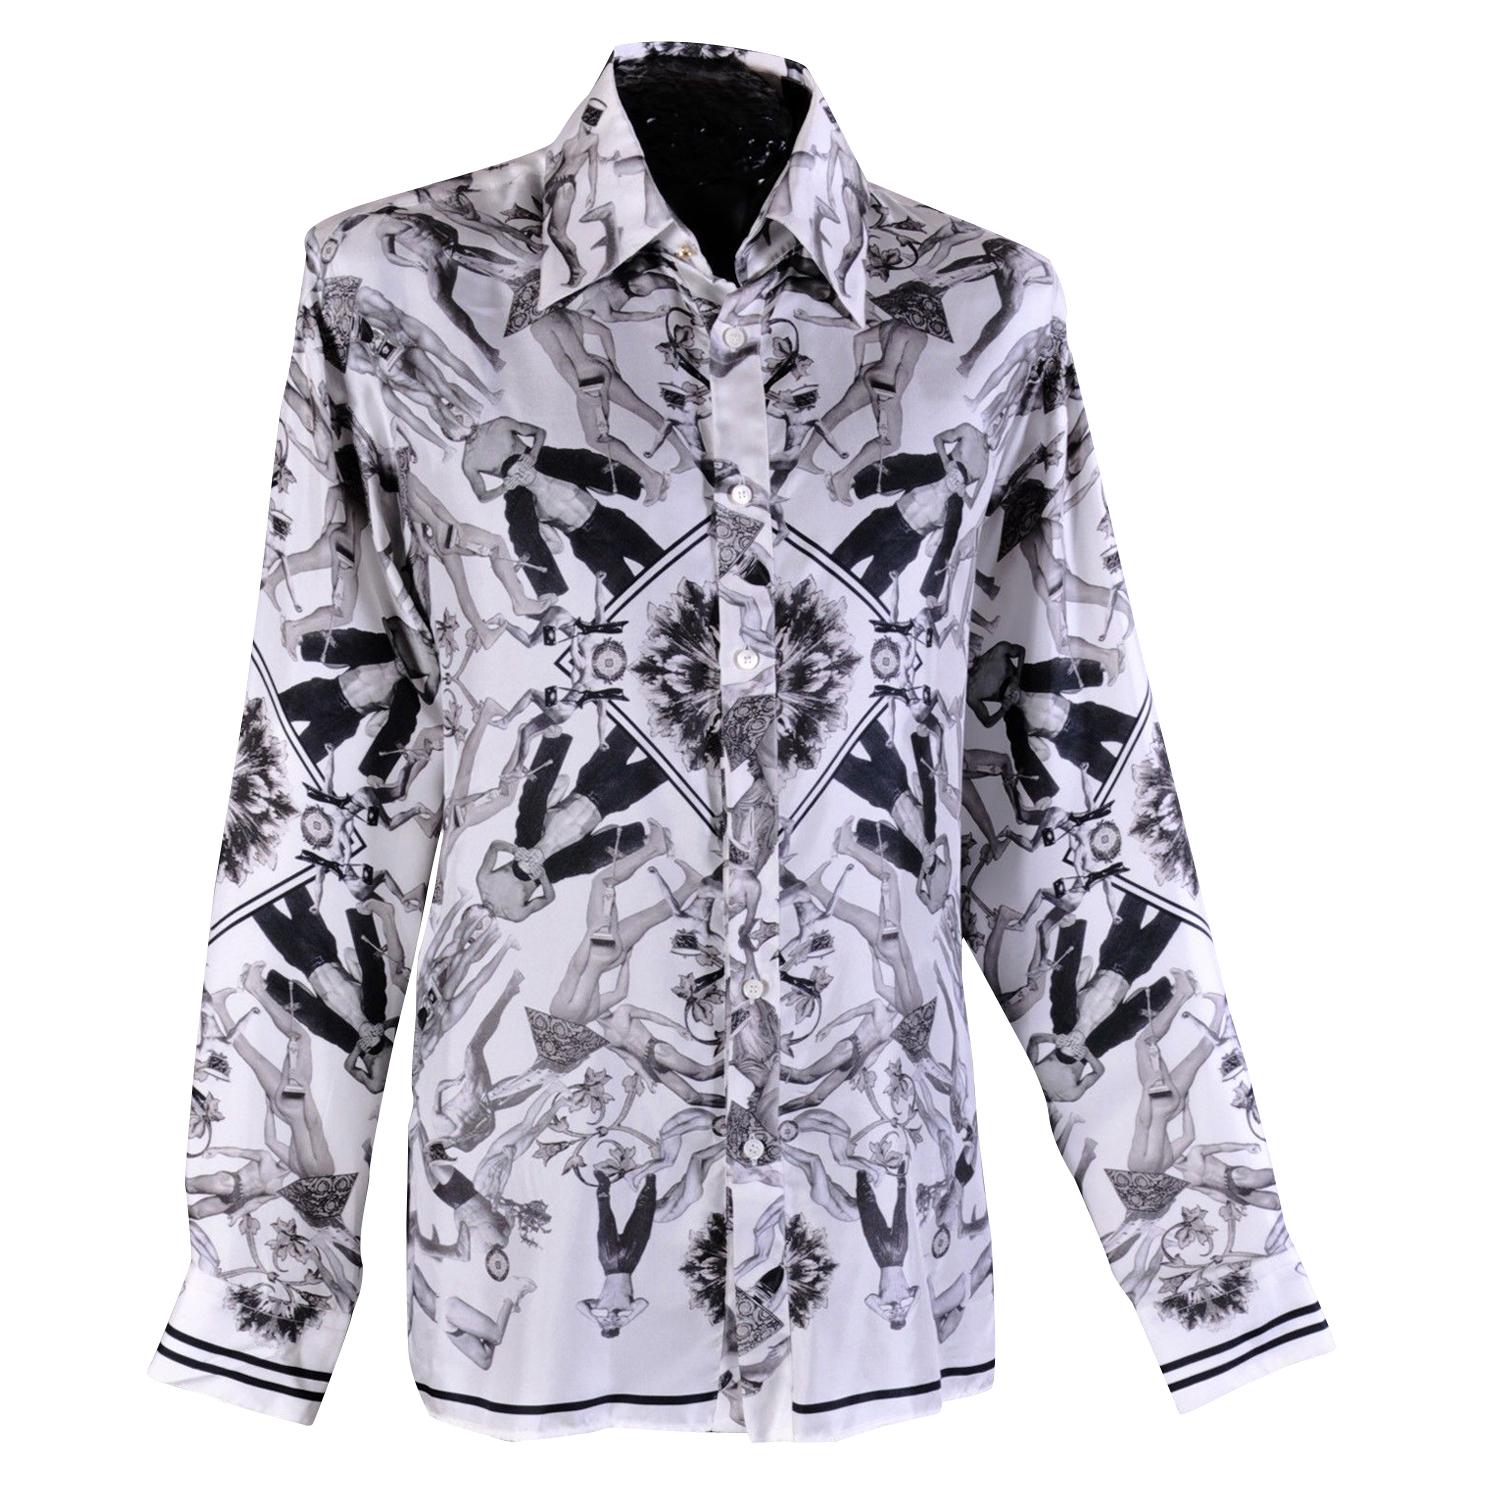 NEW VERSACE 100% SILK SHIRT in ICONIC BLACK and WHITE PRINT for MEN